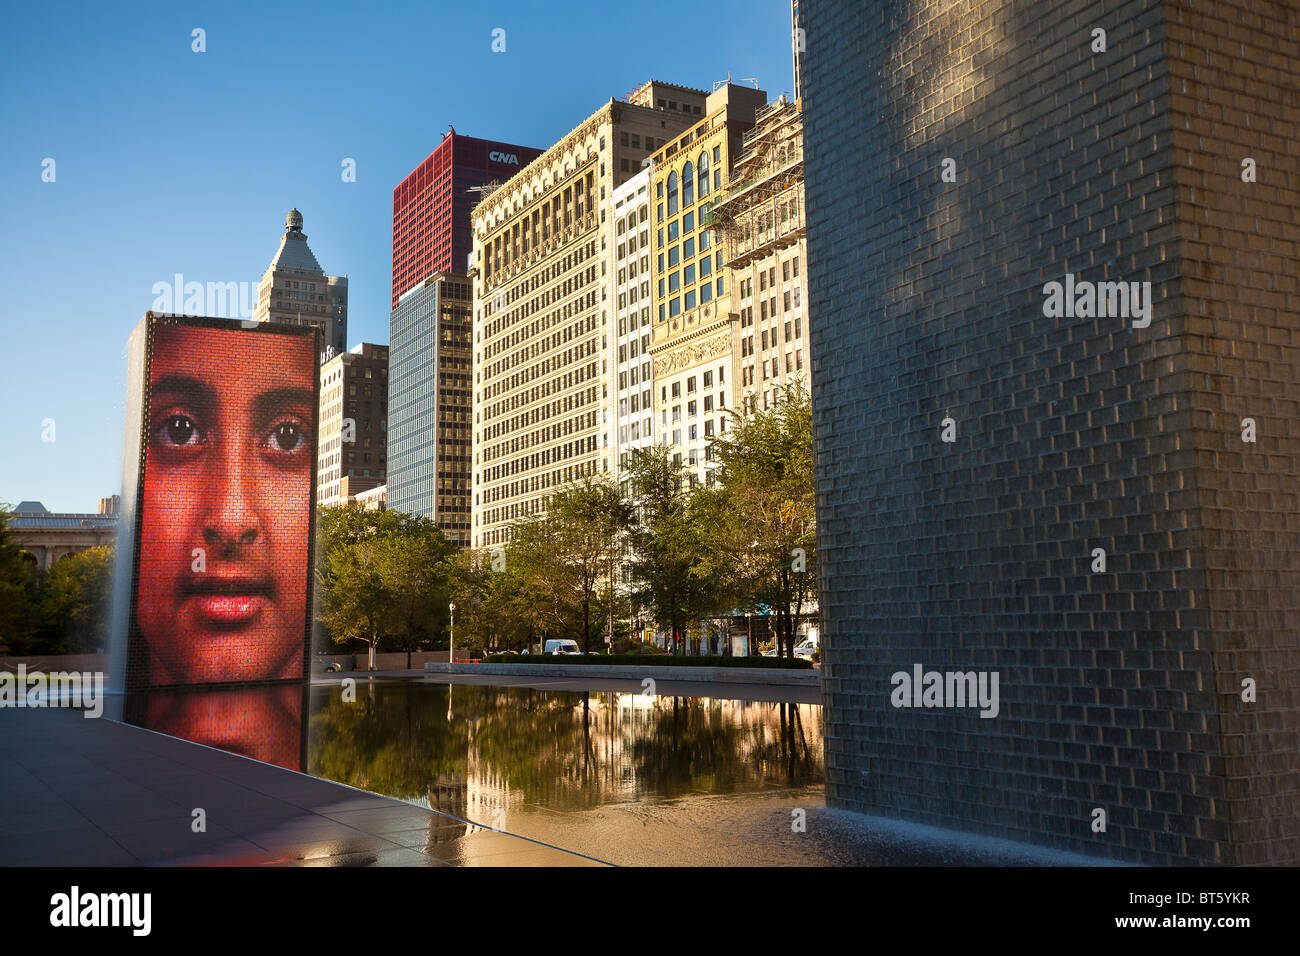 The Crown Fountain by Spanish artist Jaume Plensa in Millennium Park in Chicago, IL, USA. Stock Photo